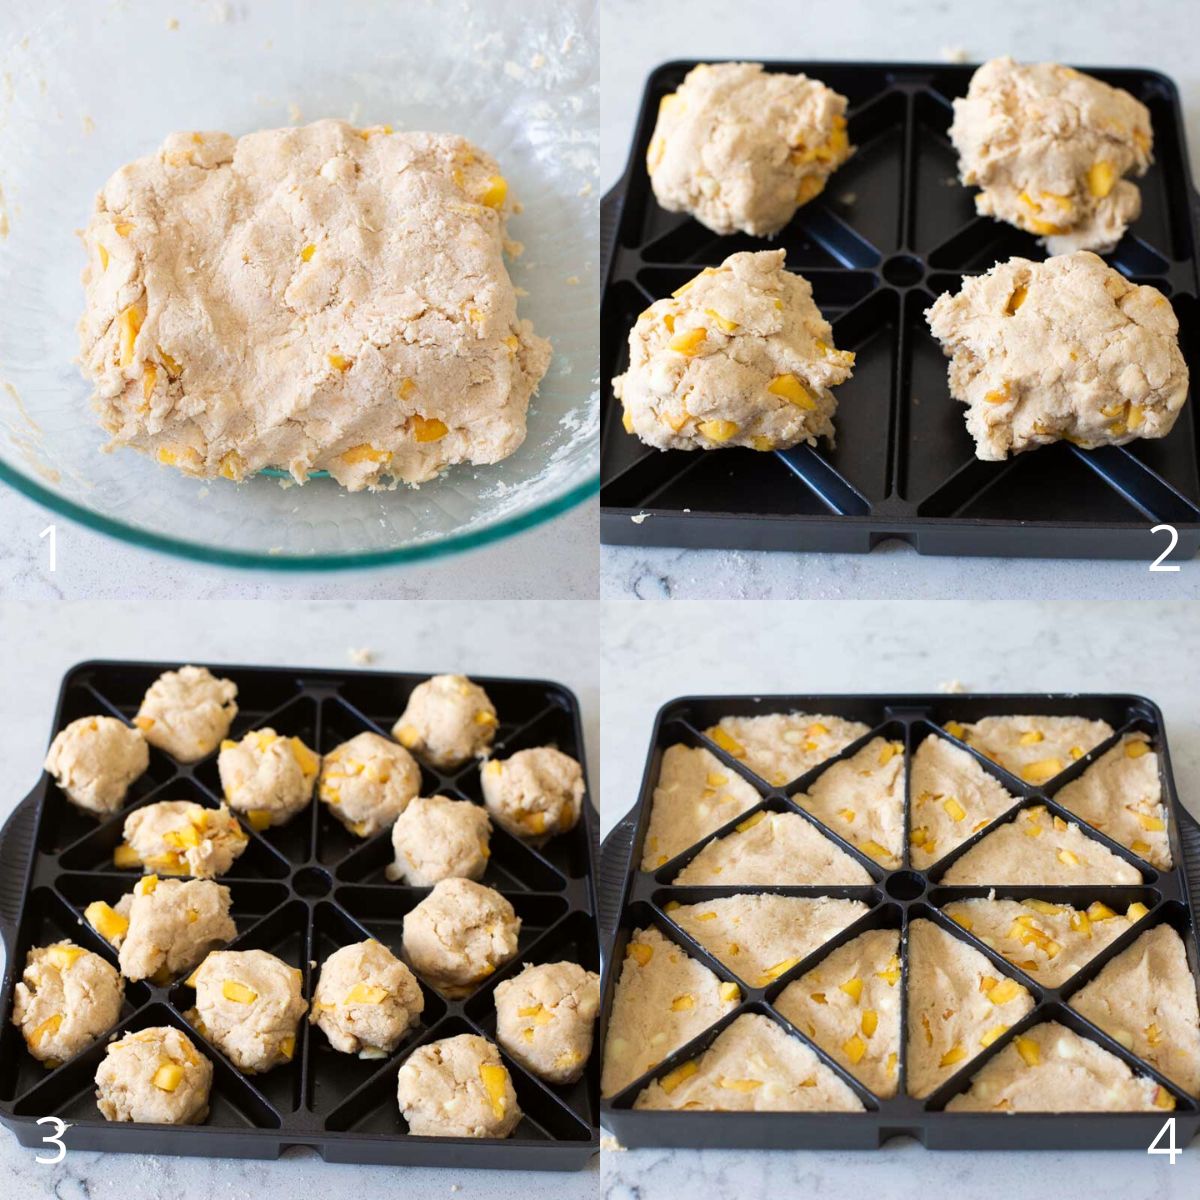 The step by step photos show how to properly divide the dough for the scones into the scone baking pan.